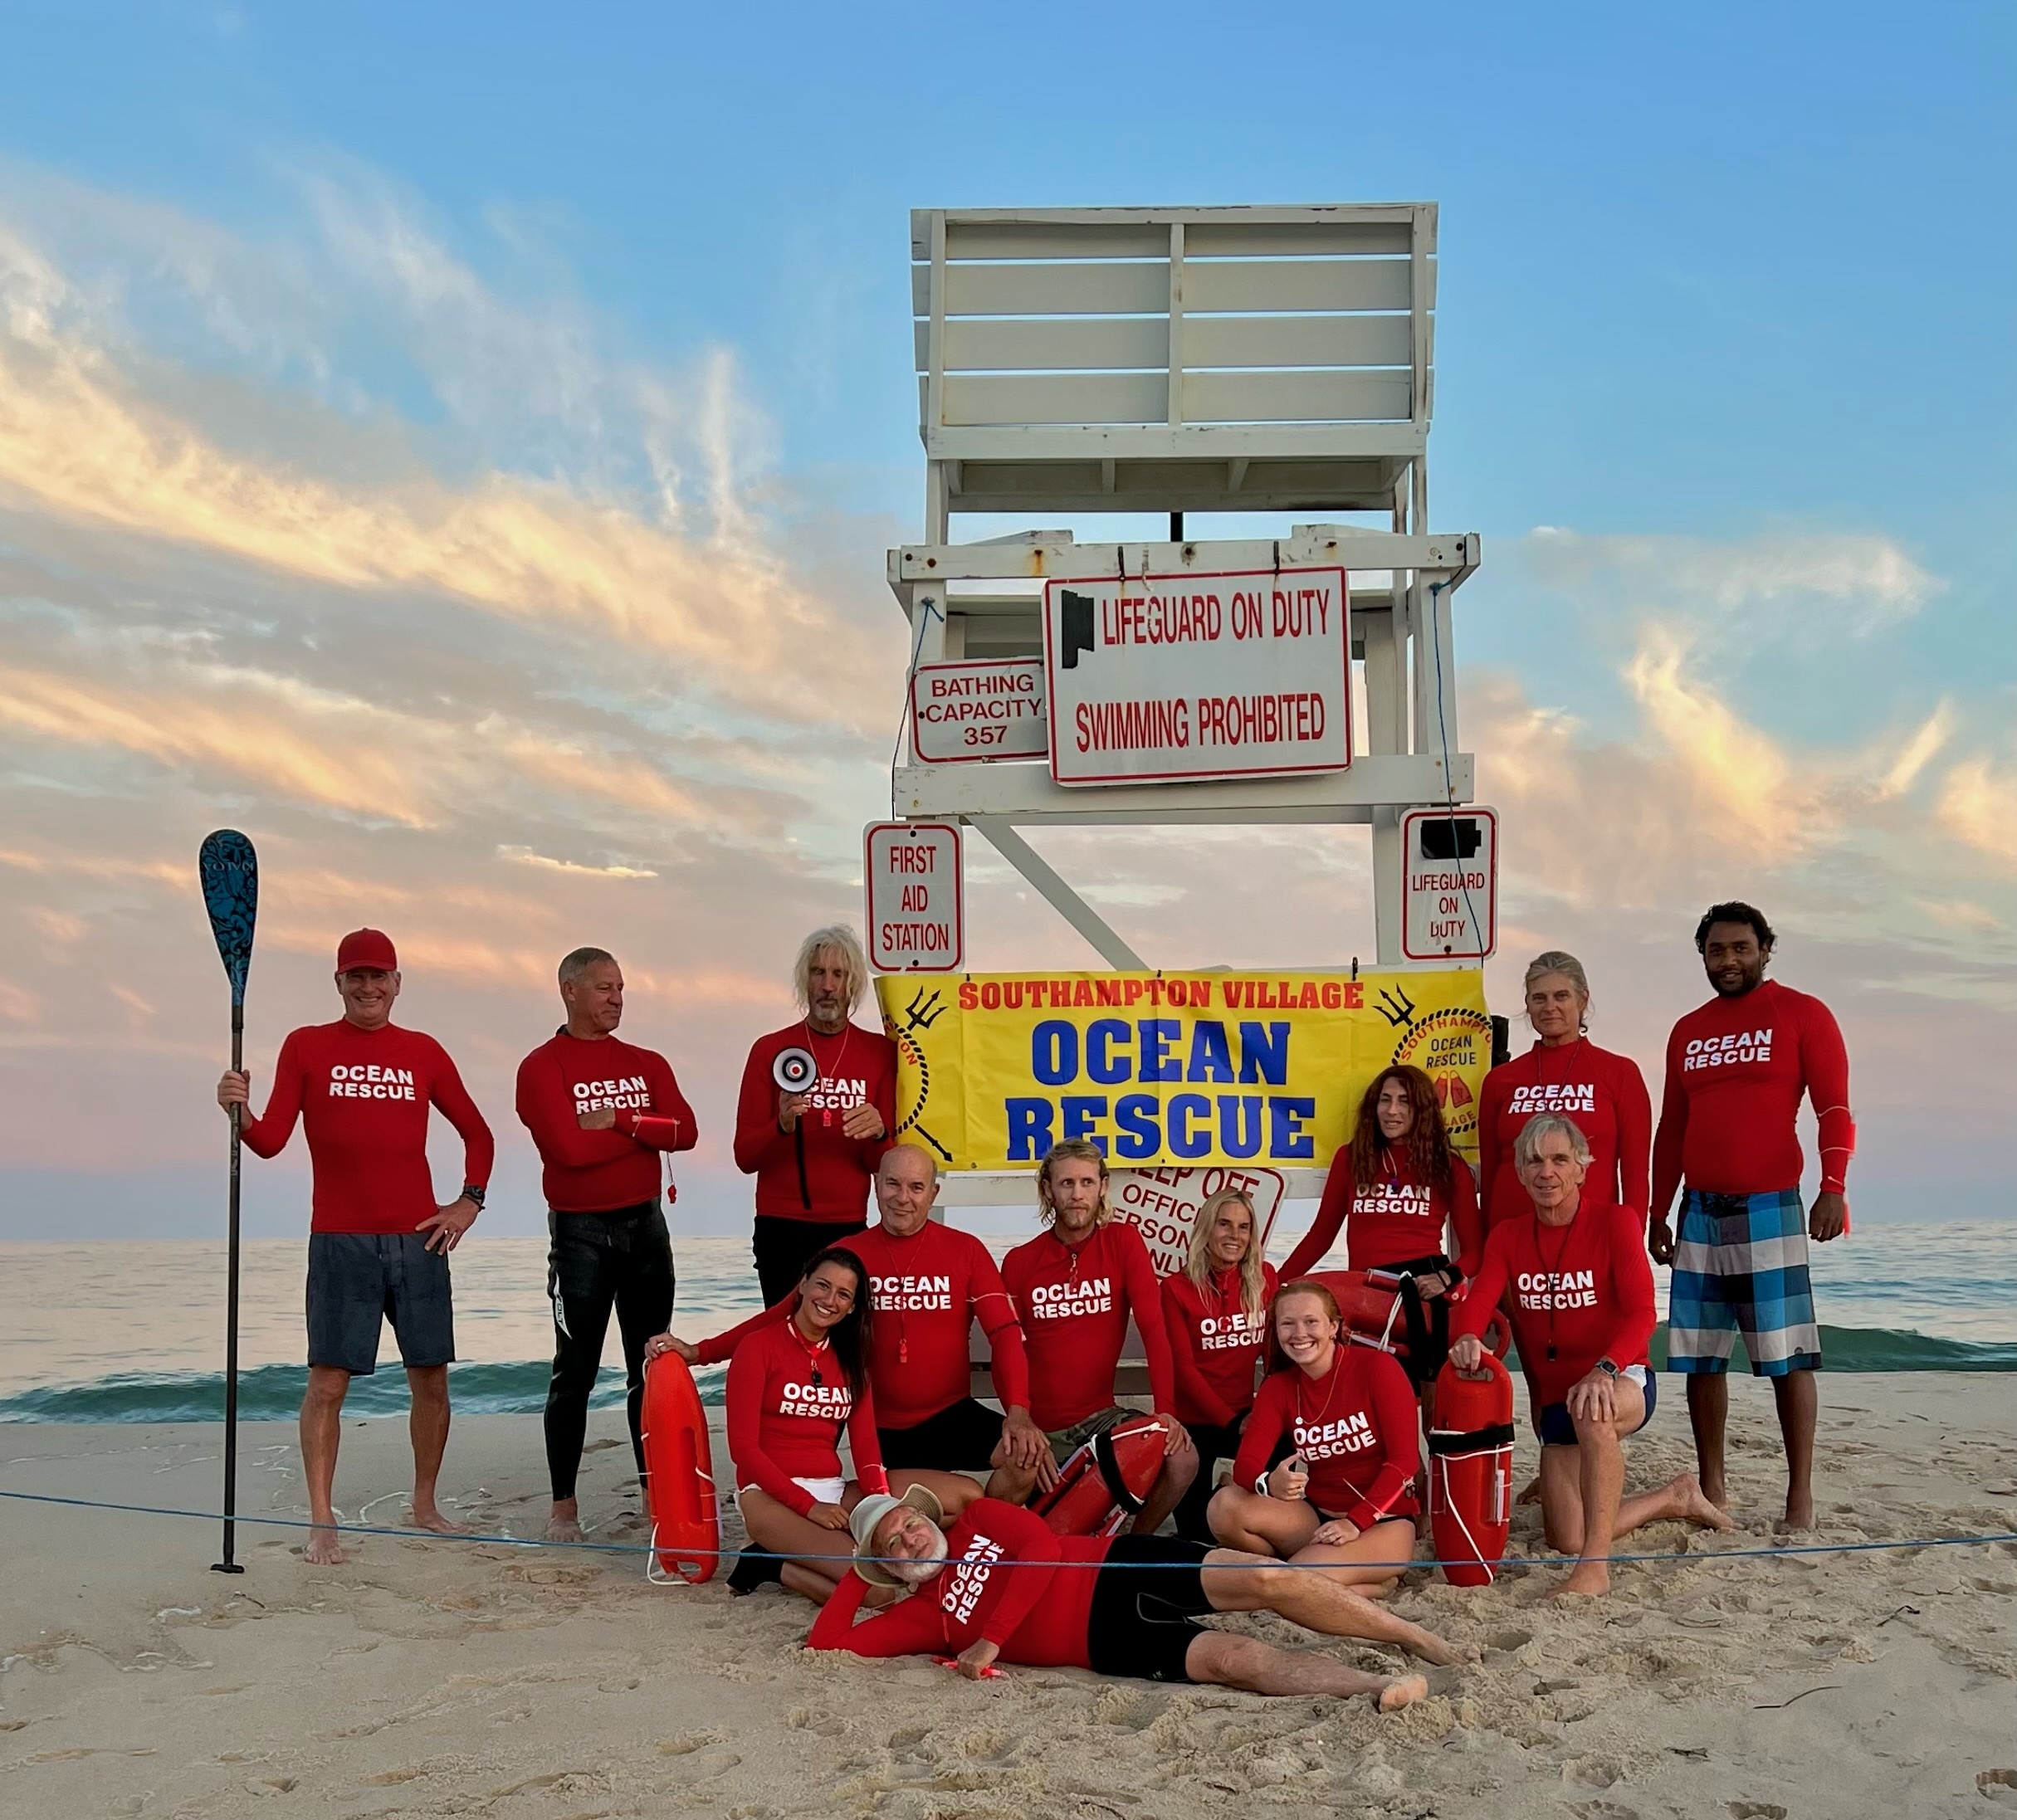 The Southampton Village Ocean Rescue group will hold its first swim challenge fundraiser on Saturday. COURTESY ALEXANDRA TALTY